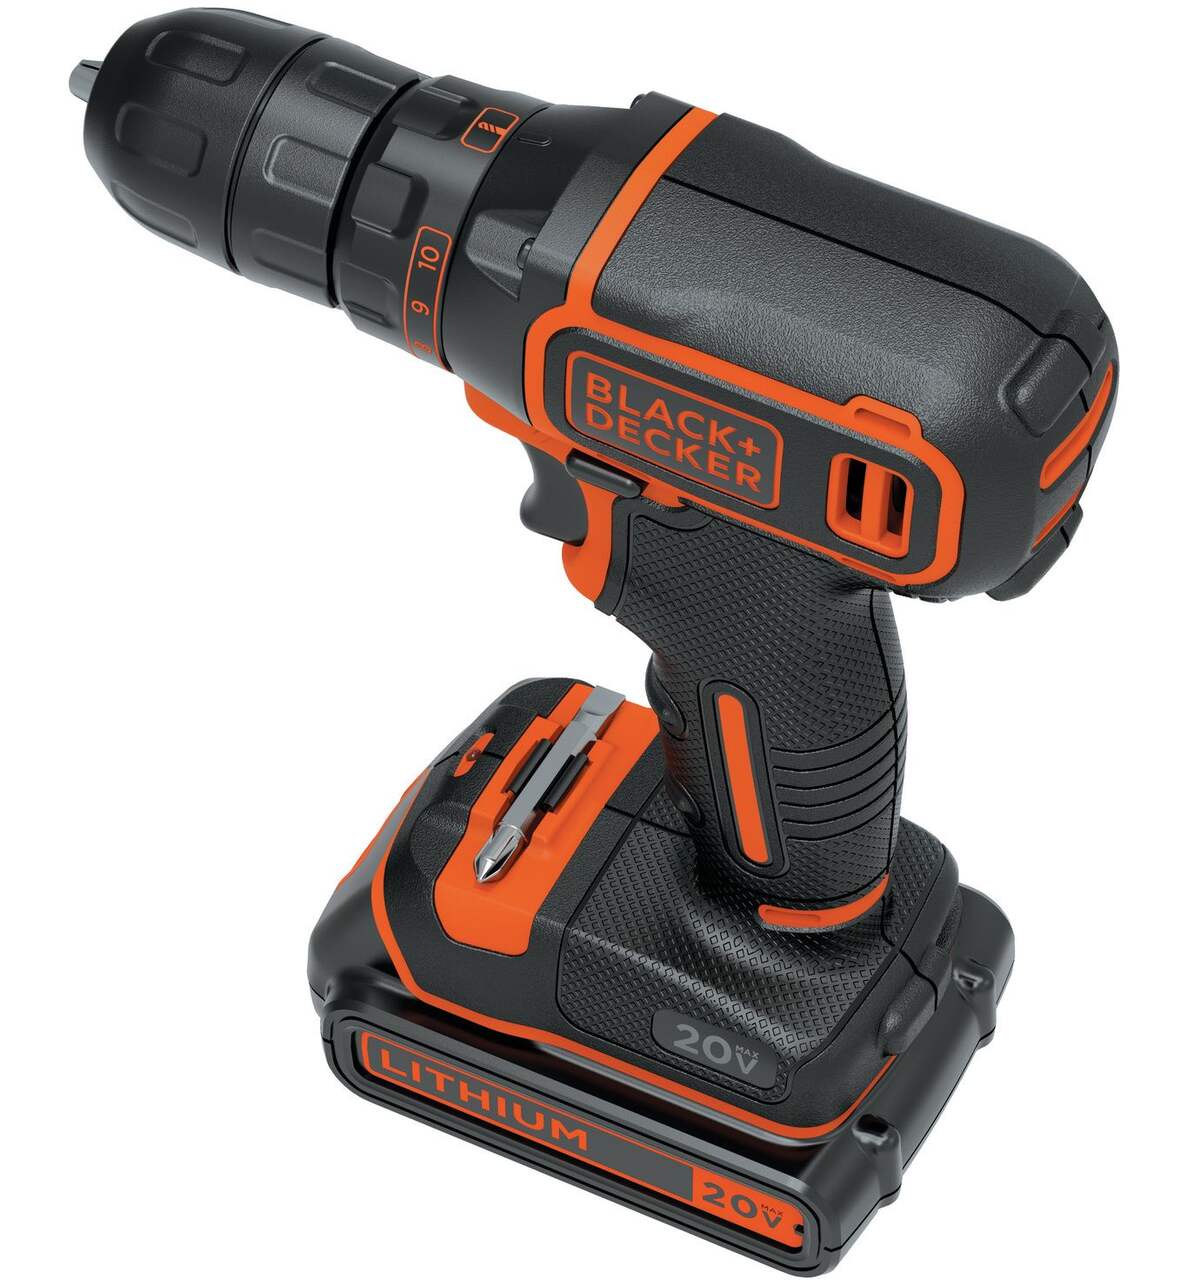 Police Auctions Canada - Black & Decker LDX112 12V Cordless Drill